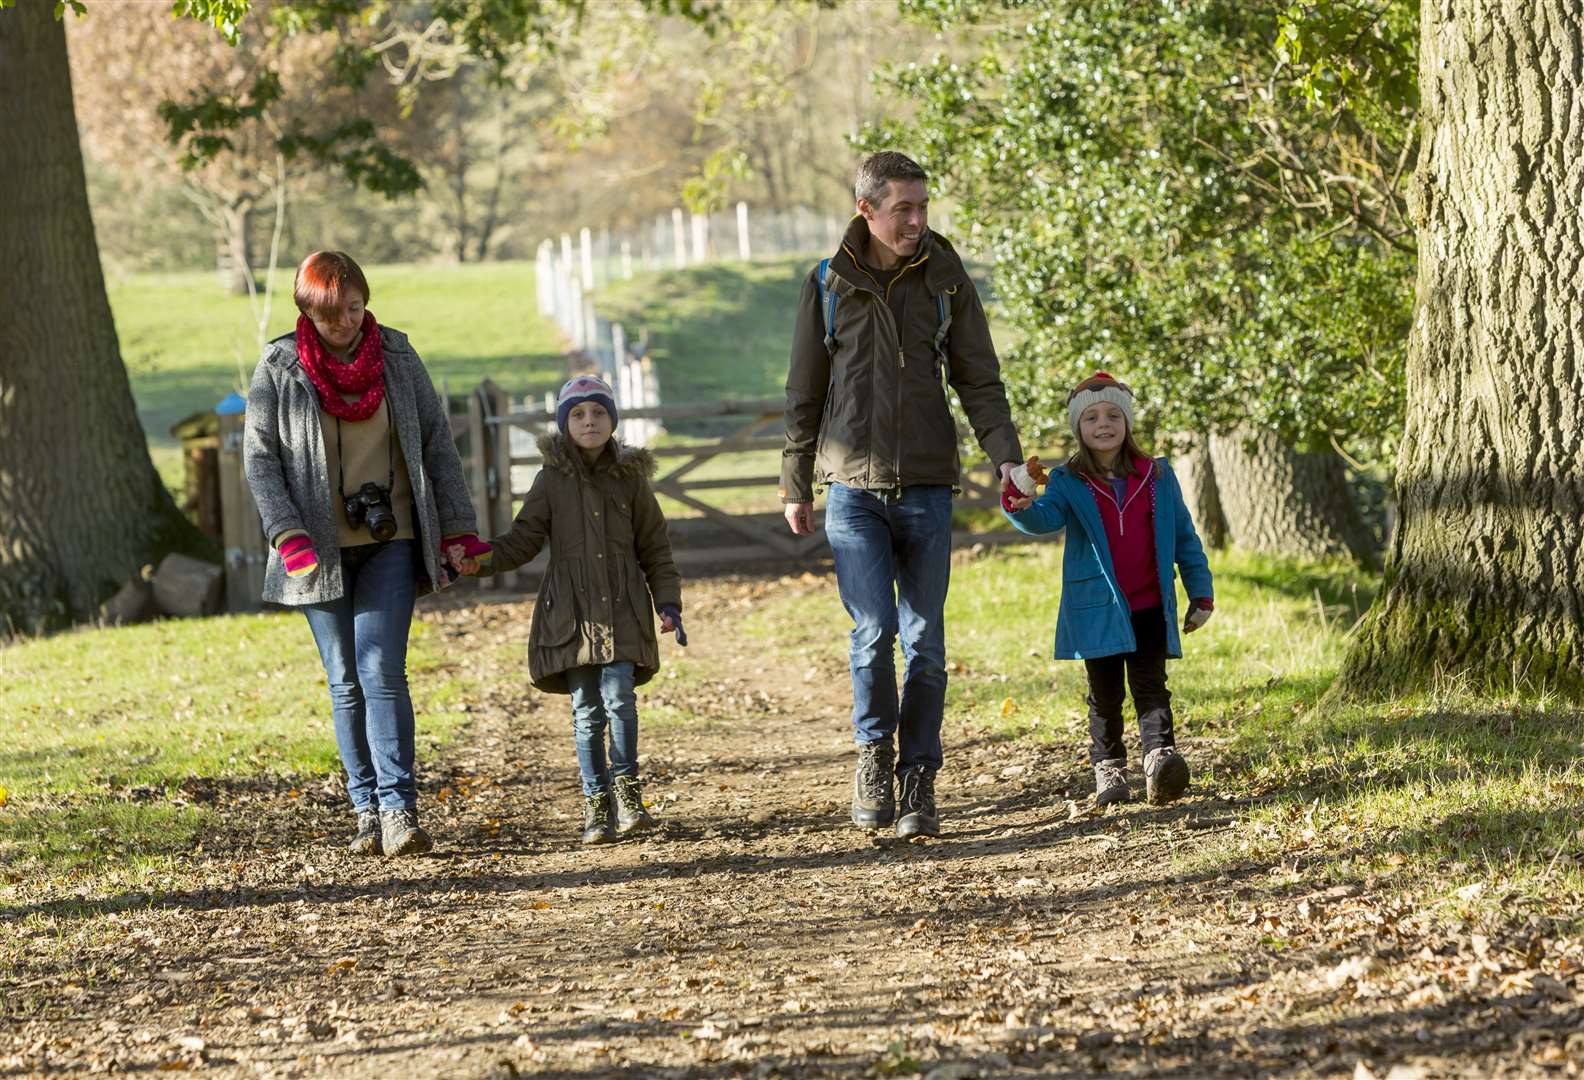 Families can enjoy a day out for the price of a lottery ticket or scratchcard. Picture: National Trust Images / John Miller.